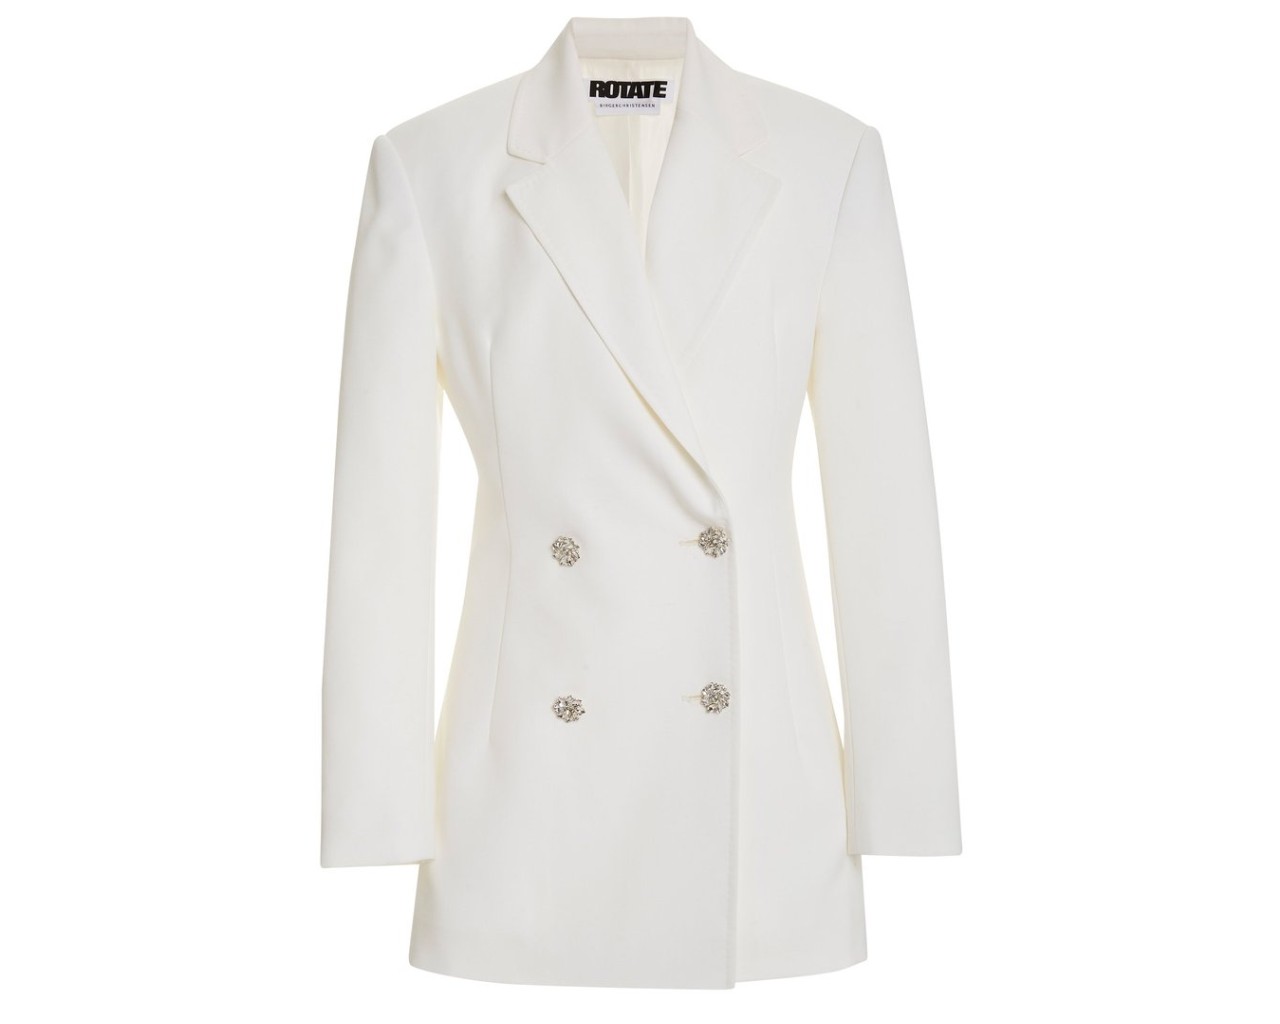 White Rotate blazer, inspired by the suffragette suit Kamala Harris wore during victory speech